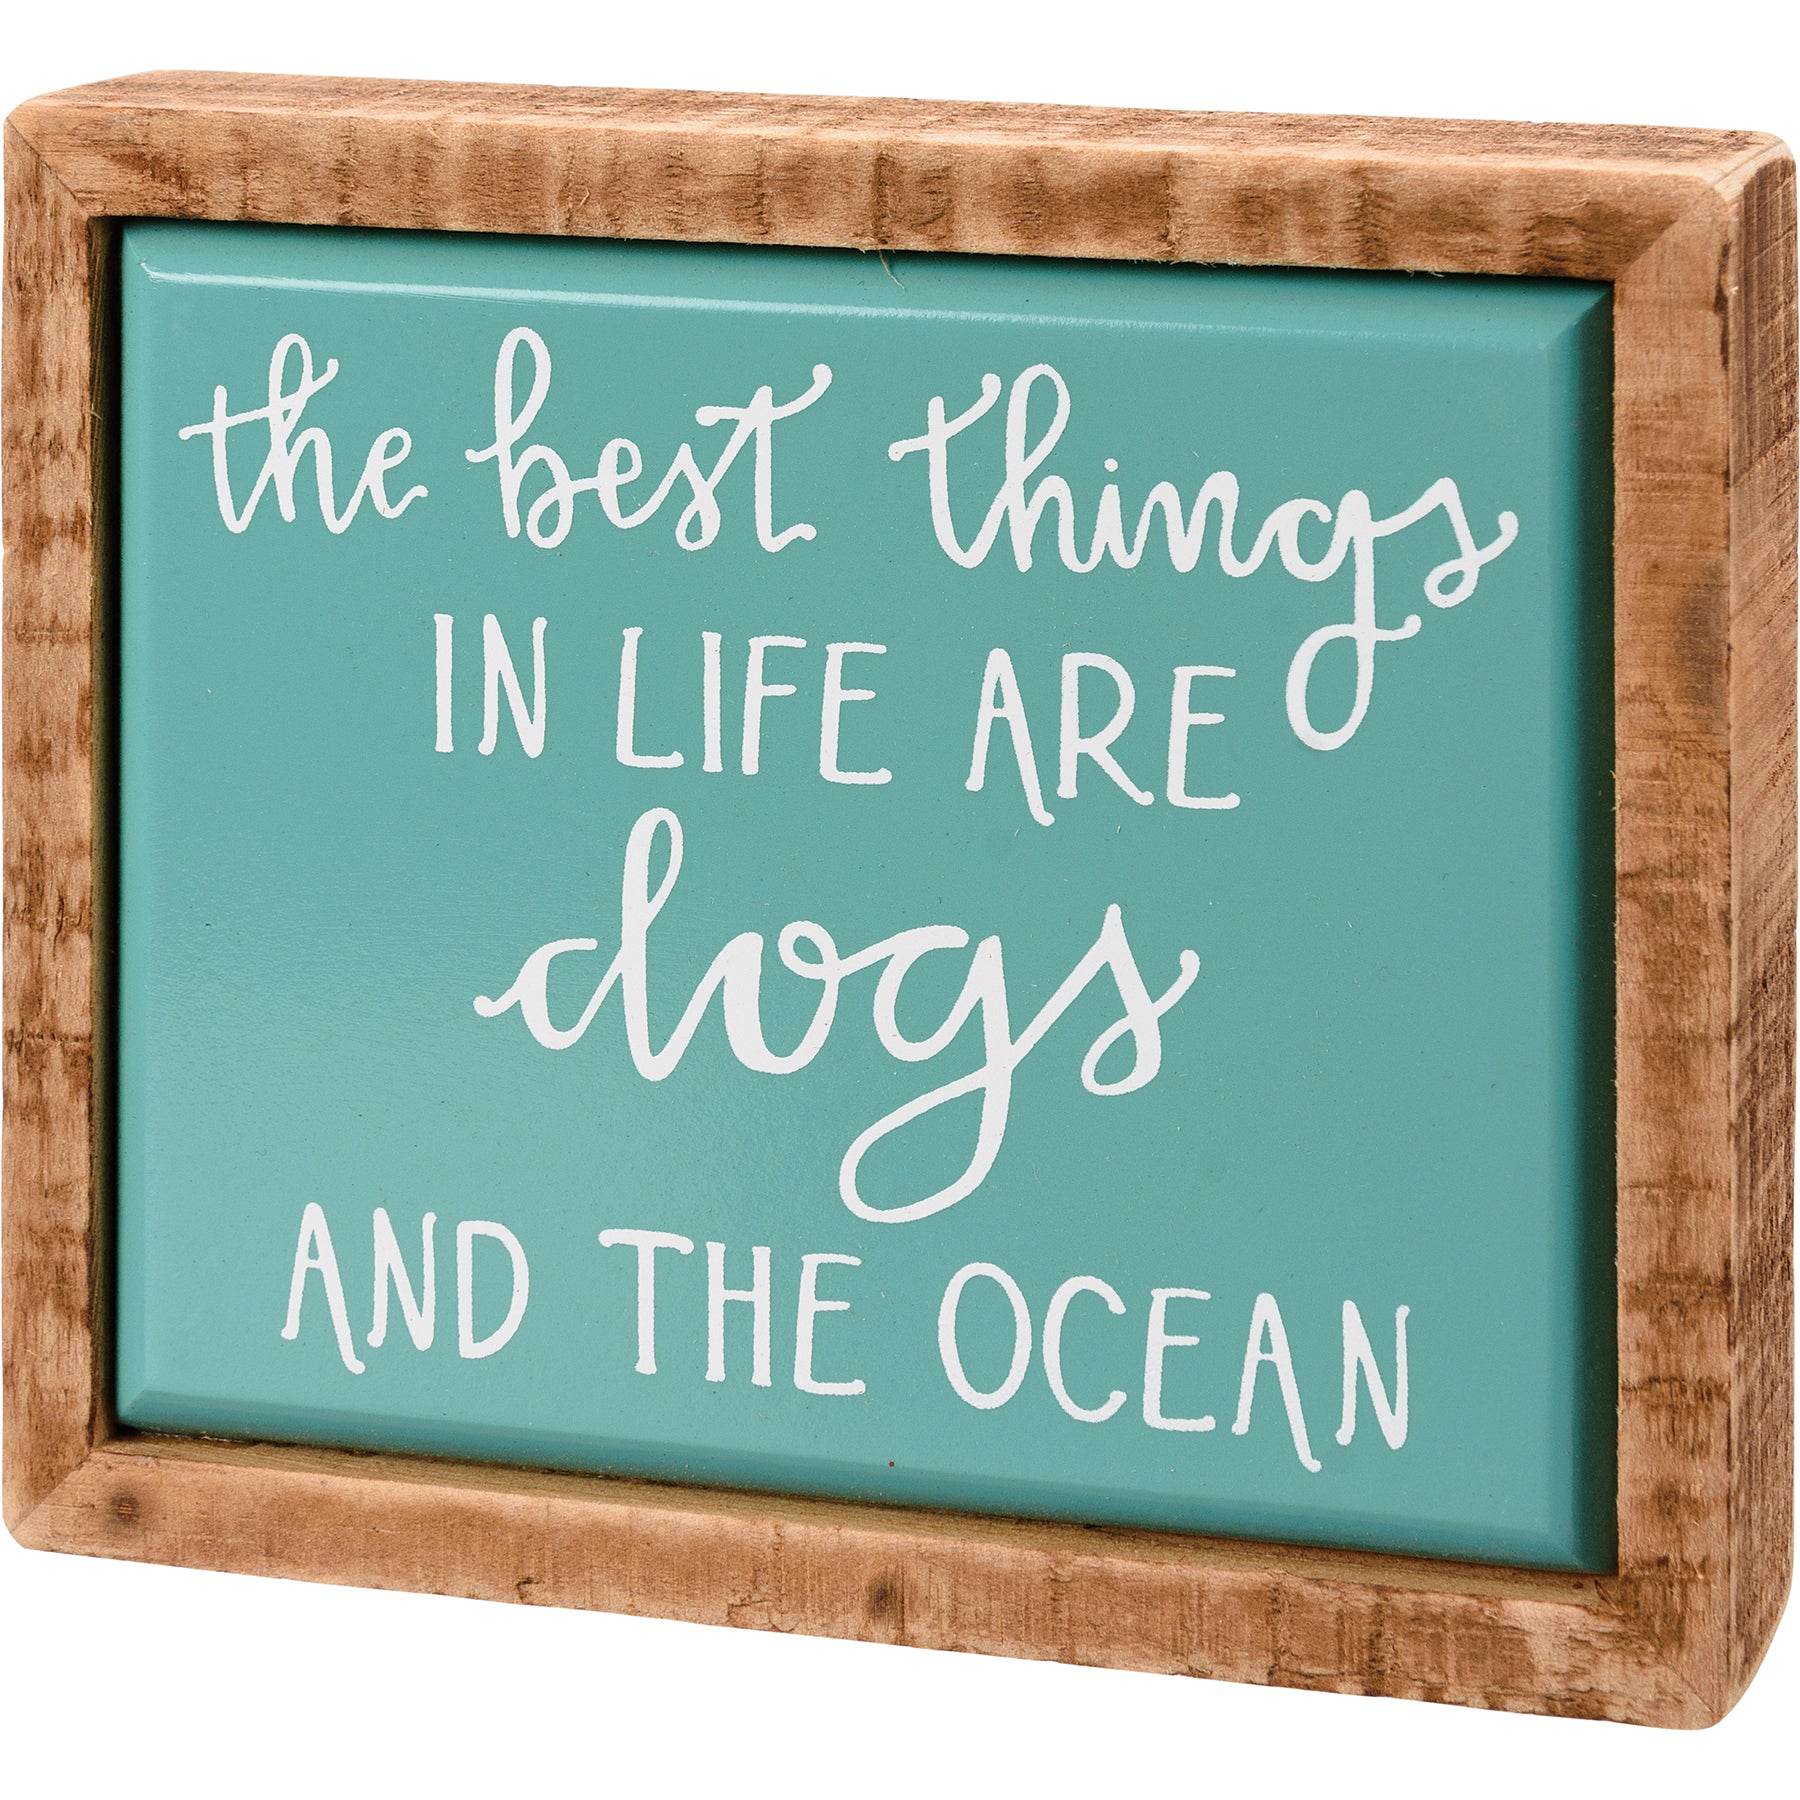 Box Sign Mini - Best Things Are Dogs And The Ocean